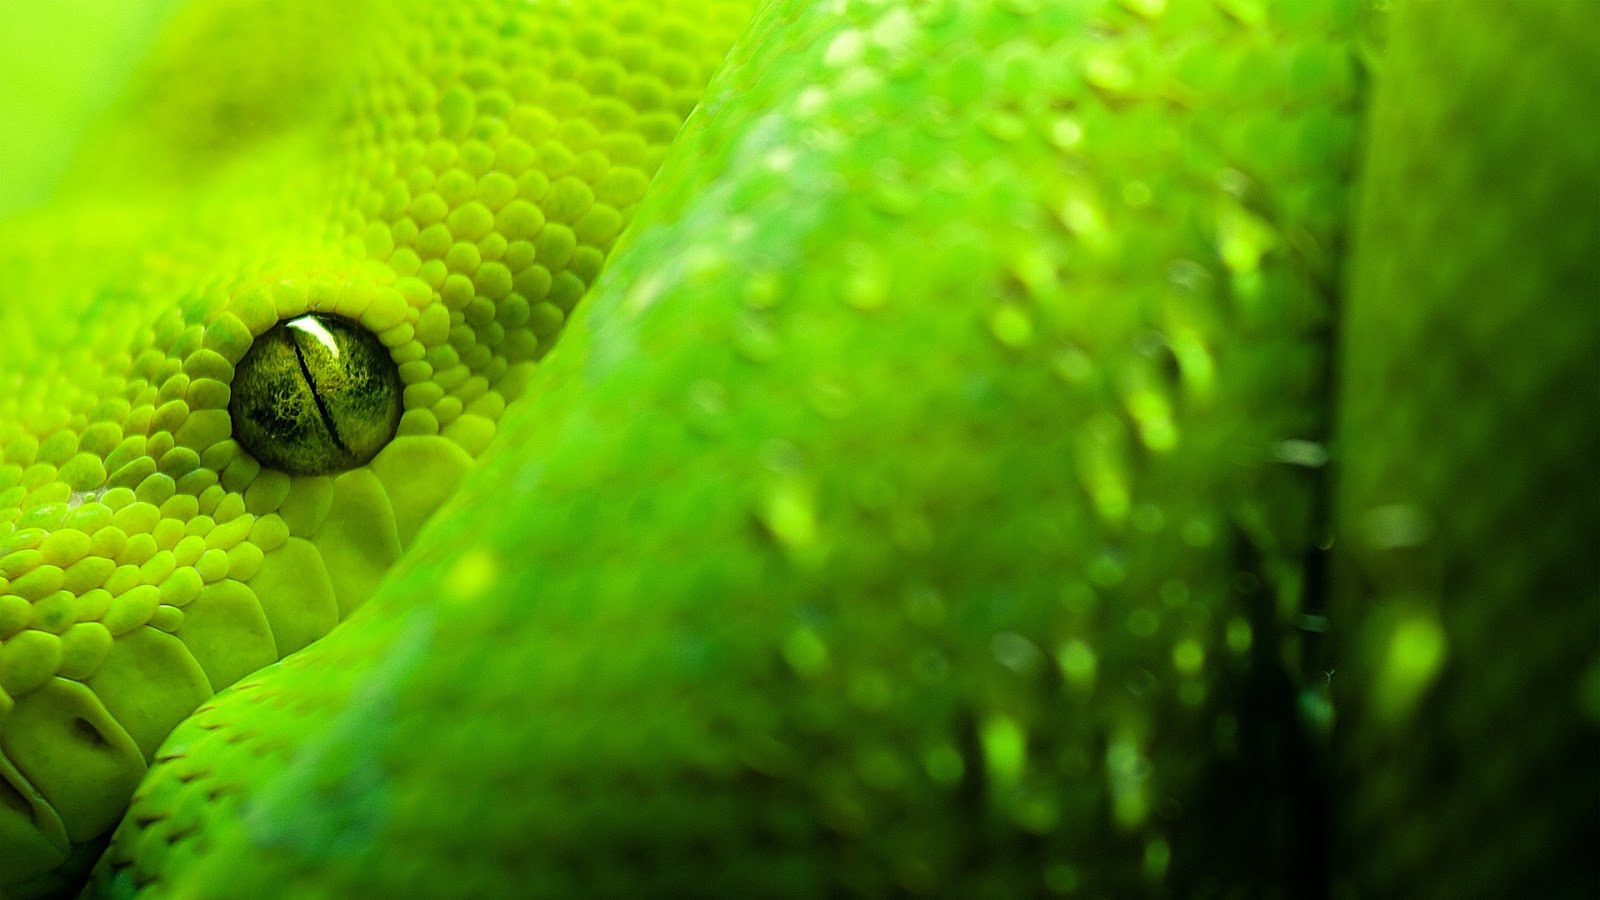 Snakes HD Wallpapers wallpaper202